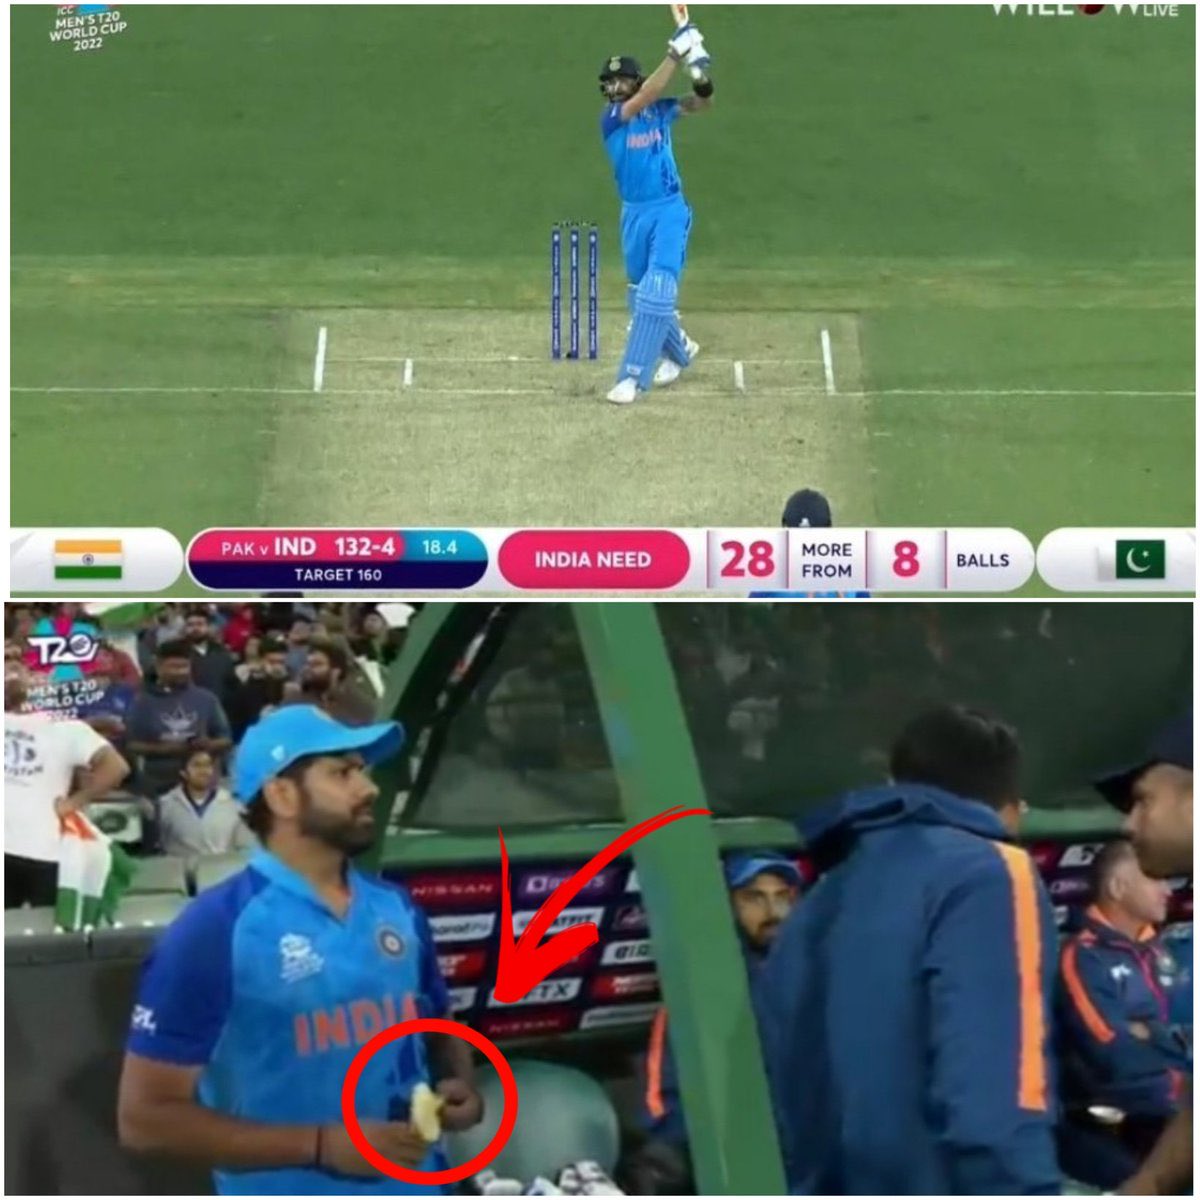 No one had a problem when Rohit Sharma was eating bananas in 10 times more pressure than WTC final, sitting in dugout, after scoring 4(8) and seeing Virat Kohli chasing the impossible.

These people are trolling Kohli who is taking some meal after fielding all day.
#WTCFinal2023